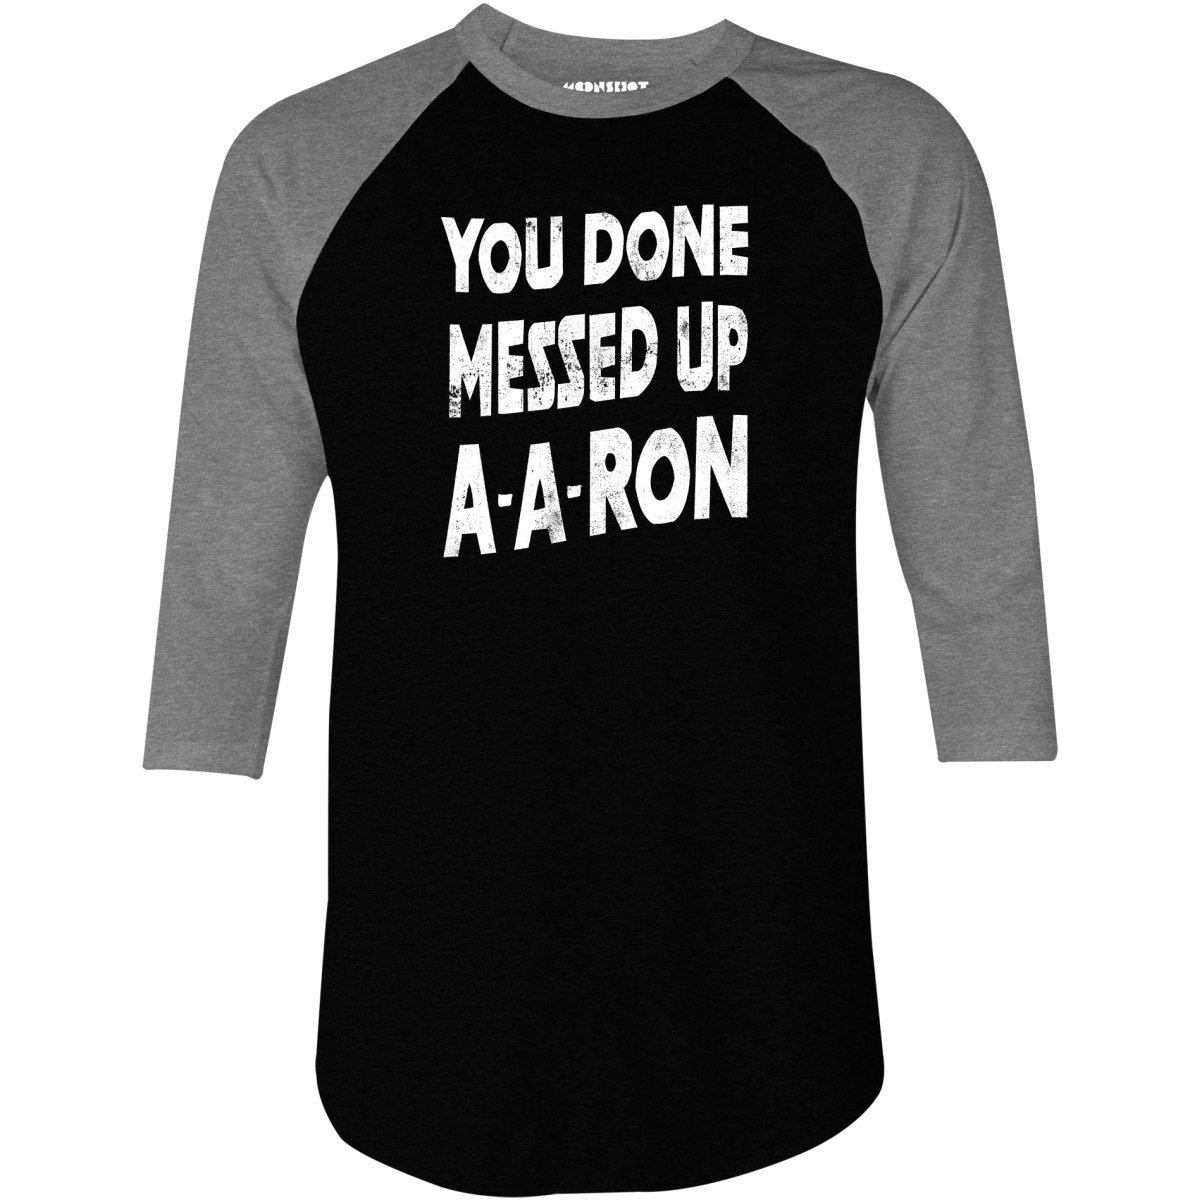 You Done Messed Up A-A-Ron - 3/4 Sleeve Raglan T-Shirt